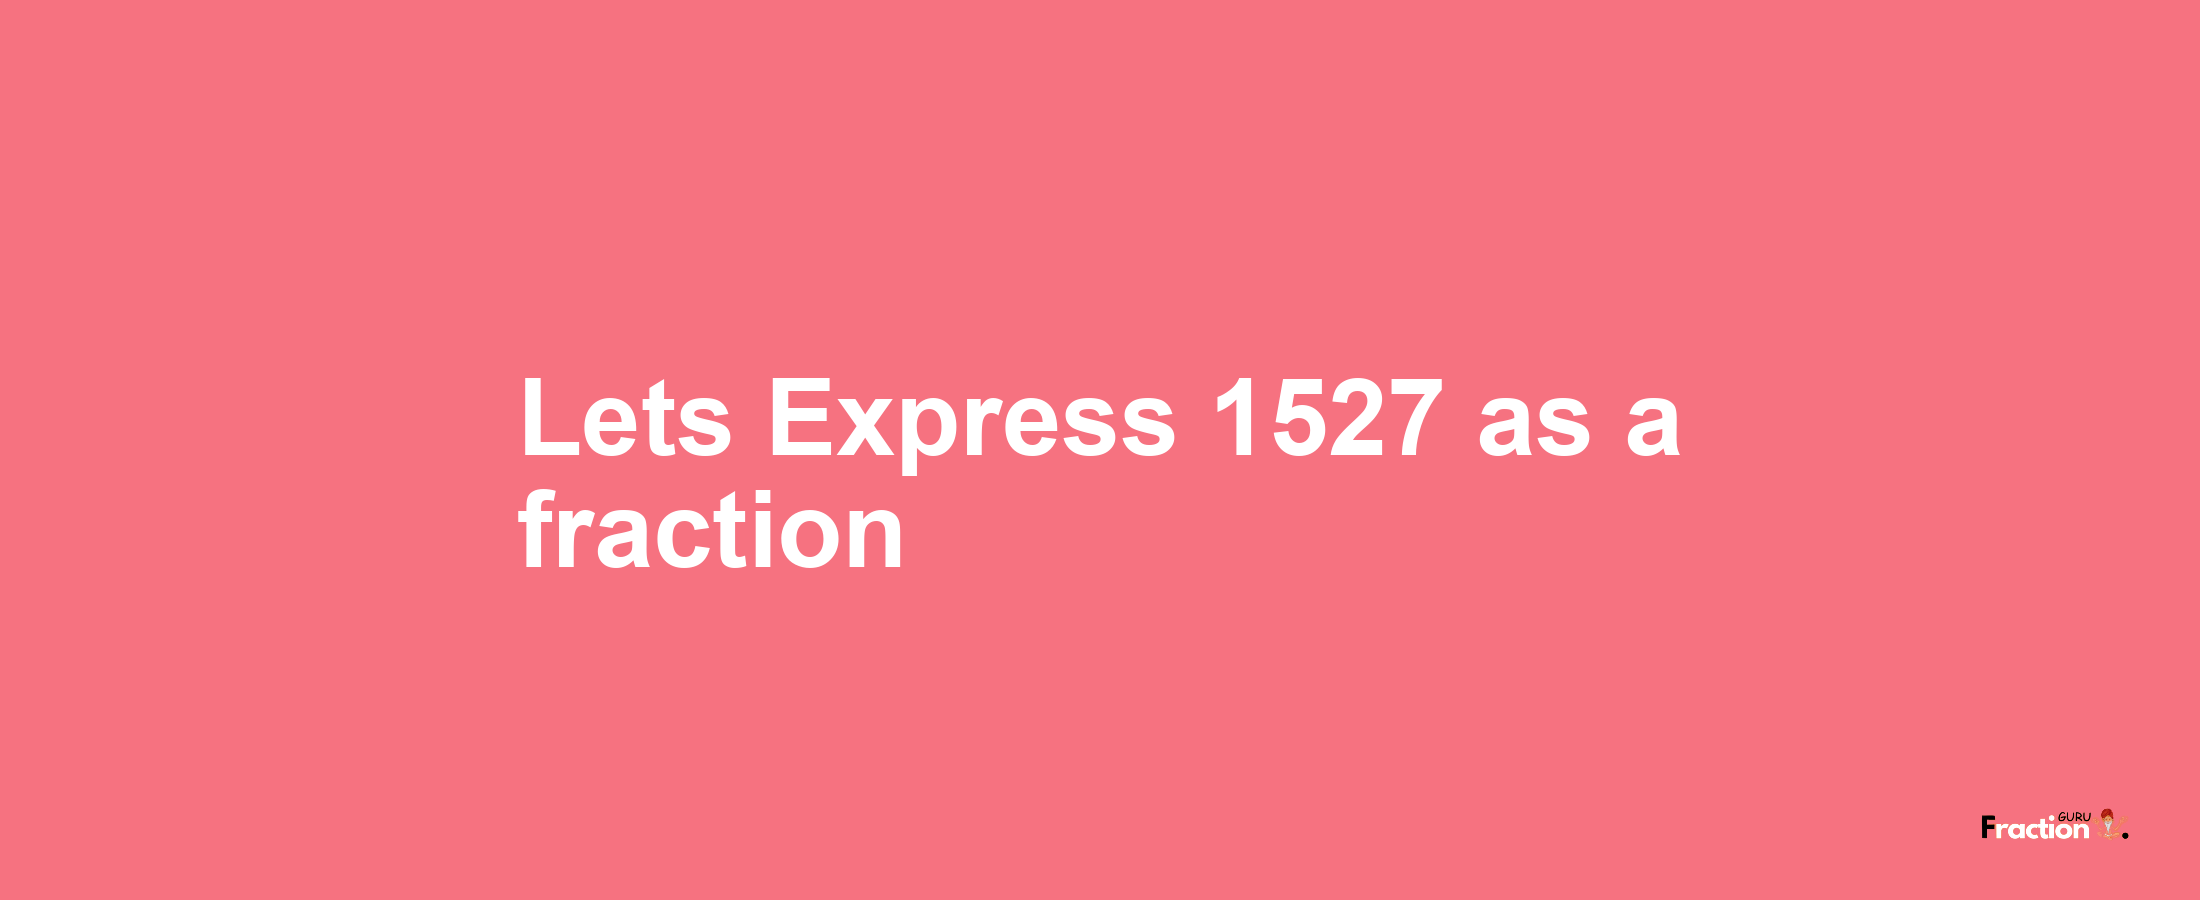 Lets Express 1527 as afraction